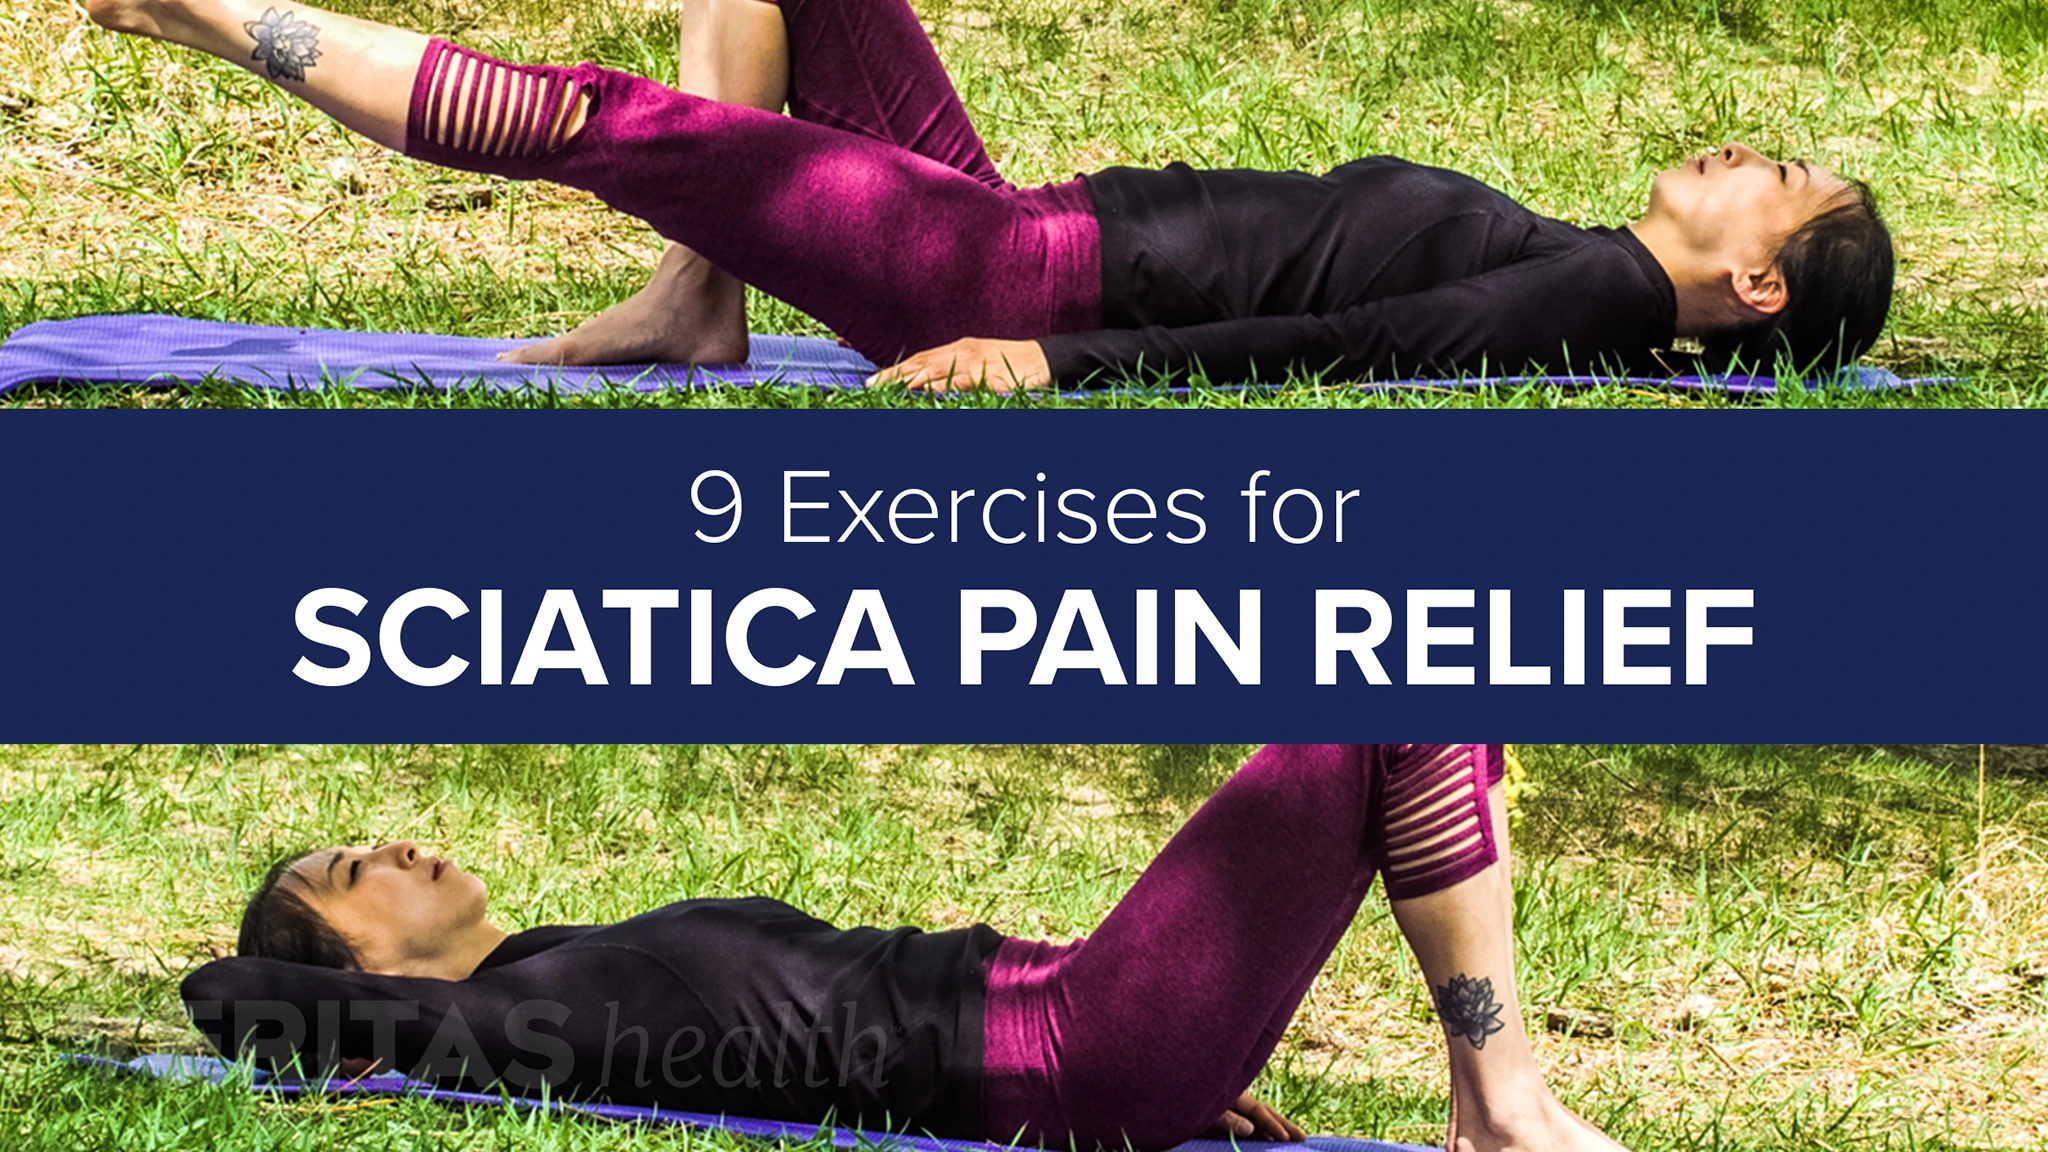 Sciatica Pain Relief: Rising Above Pain | Advanced Sports and Spine